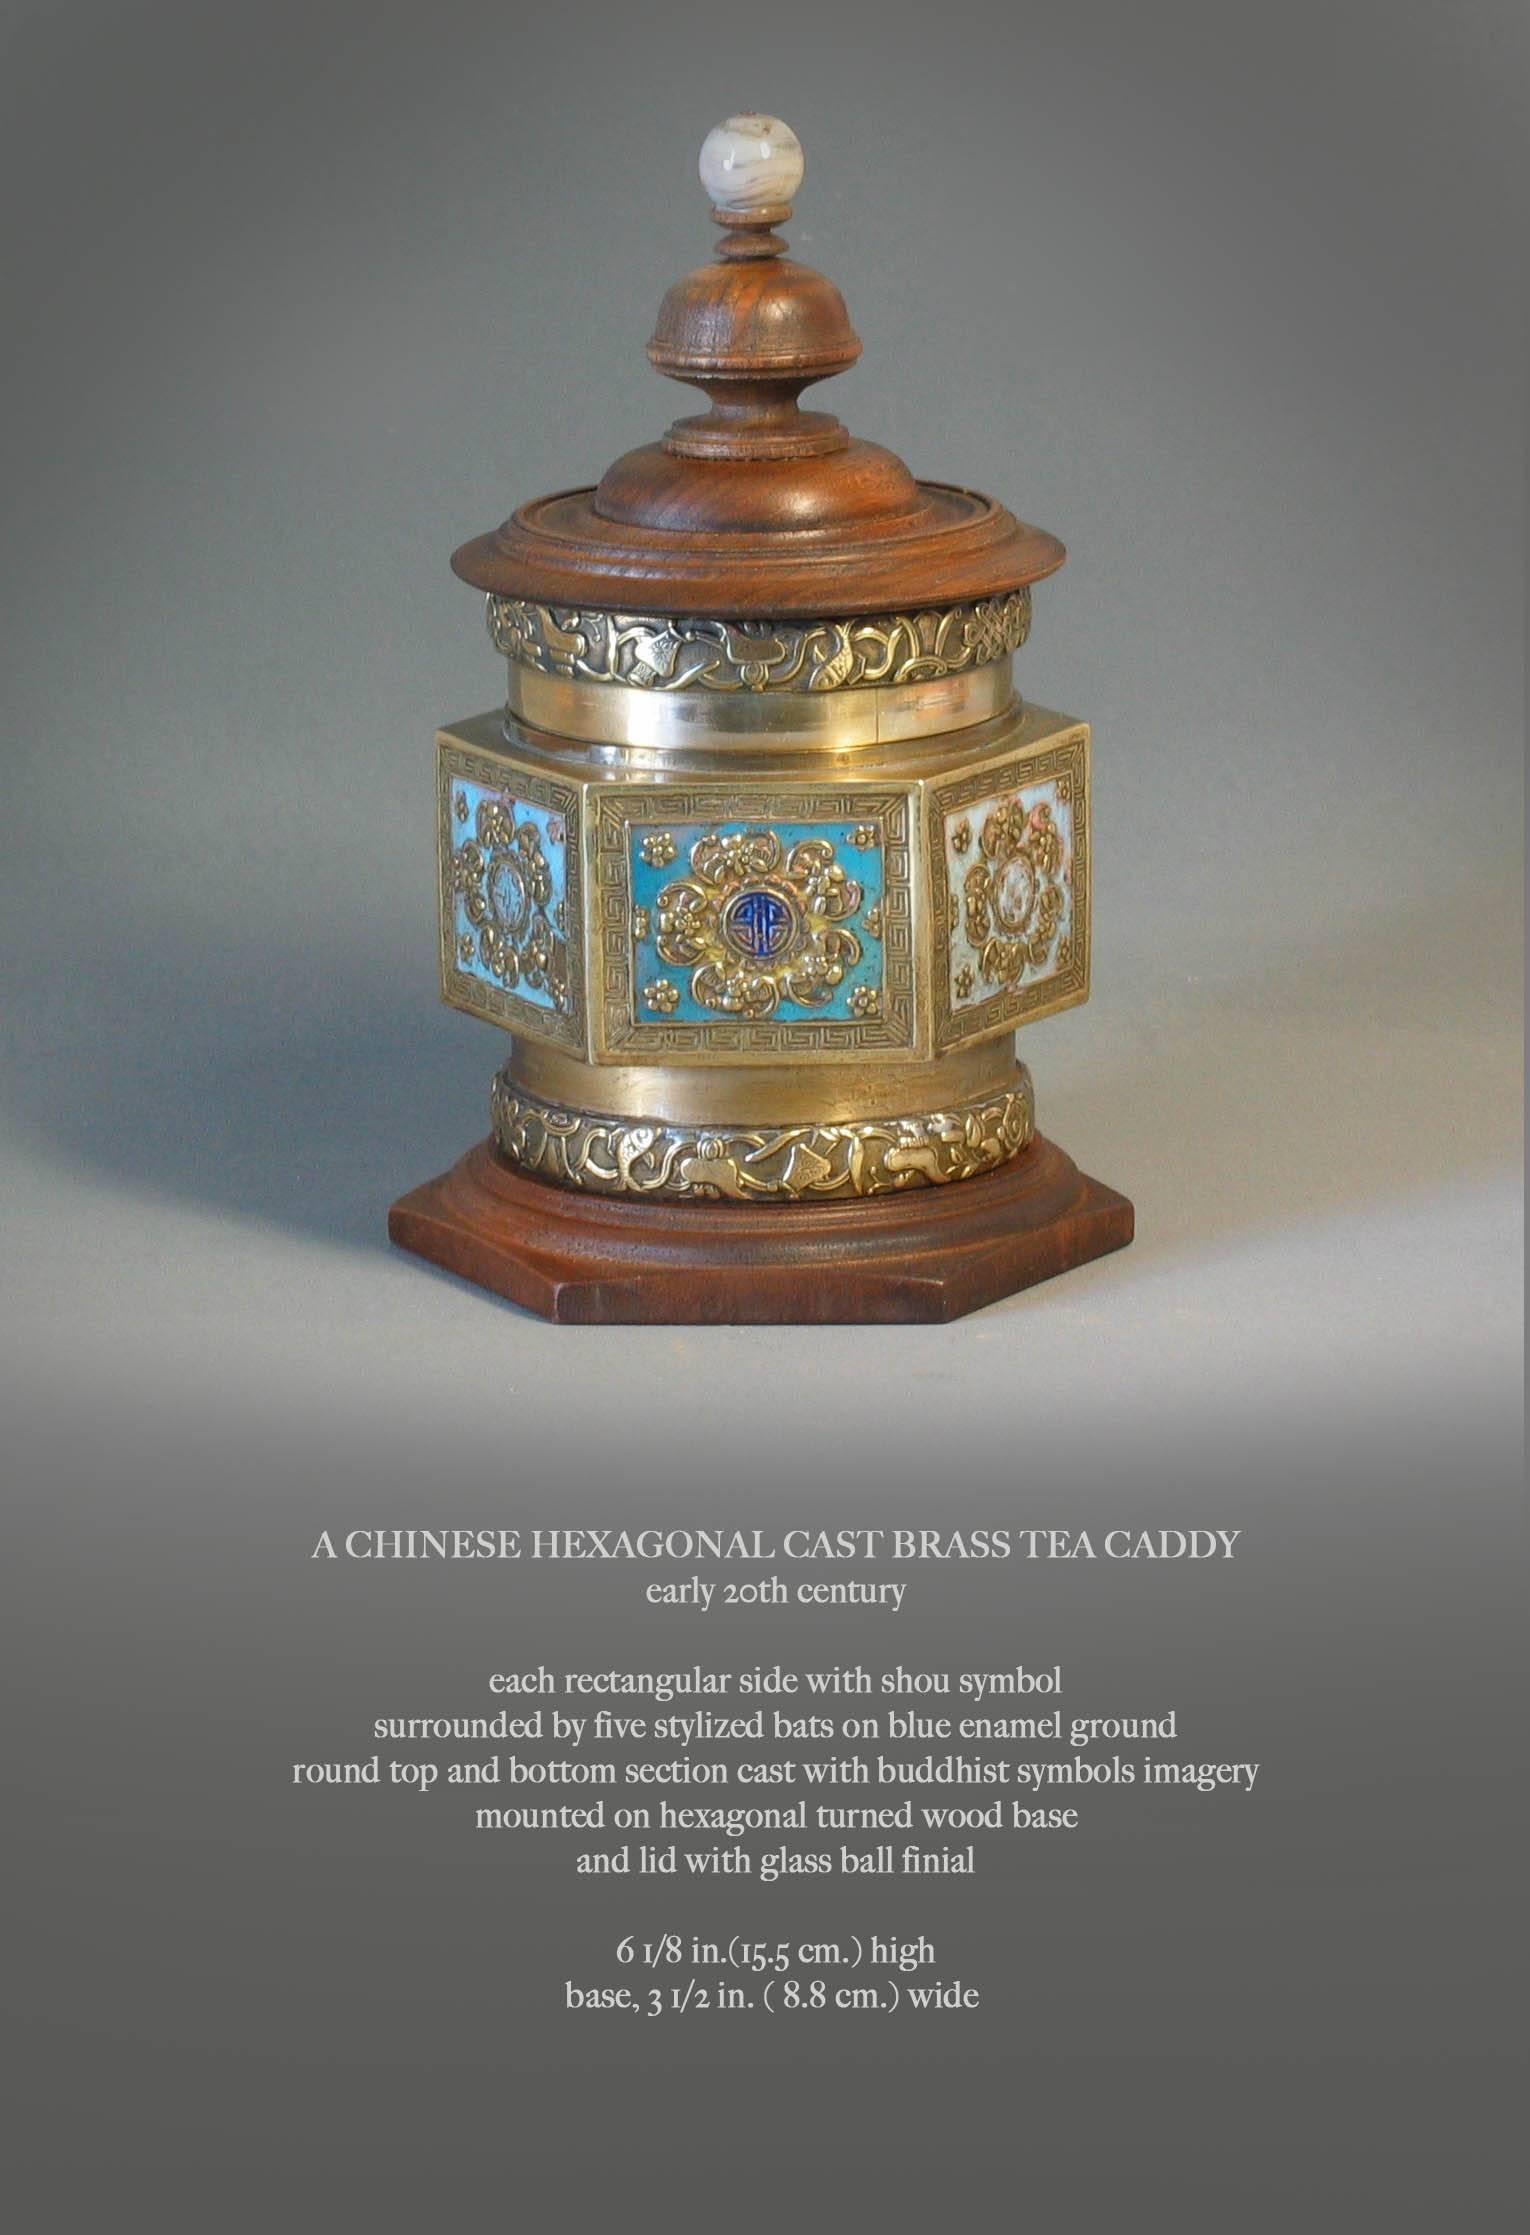 A Chinese hexagonal cast brass tea caddy, early 20th century. Each rectangular side with a shou symbol surrounded by five stylized bats on blue enamel background, round top and bottom section cast with Buddhist symbols imagery, mounted on hexagonal